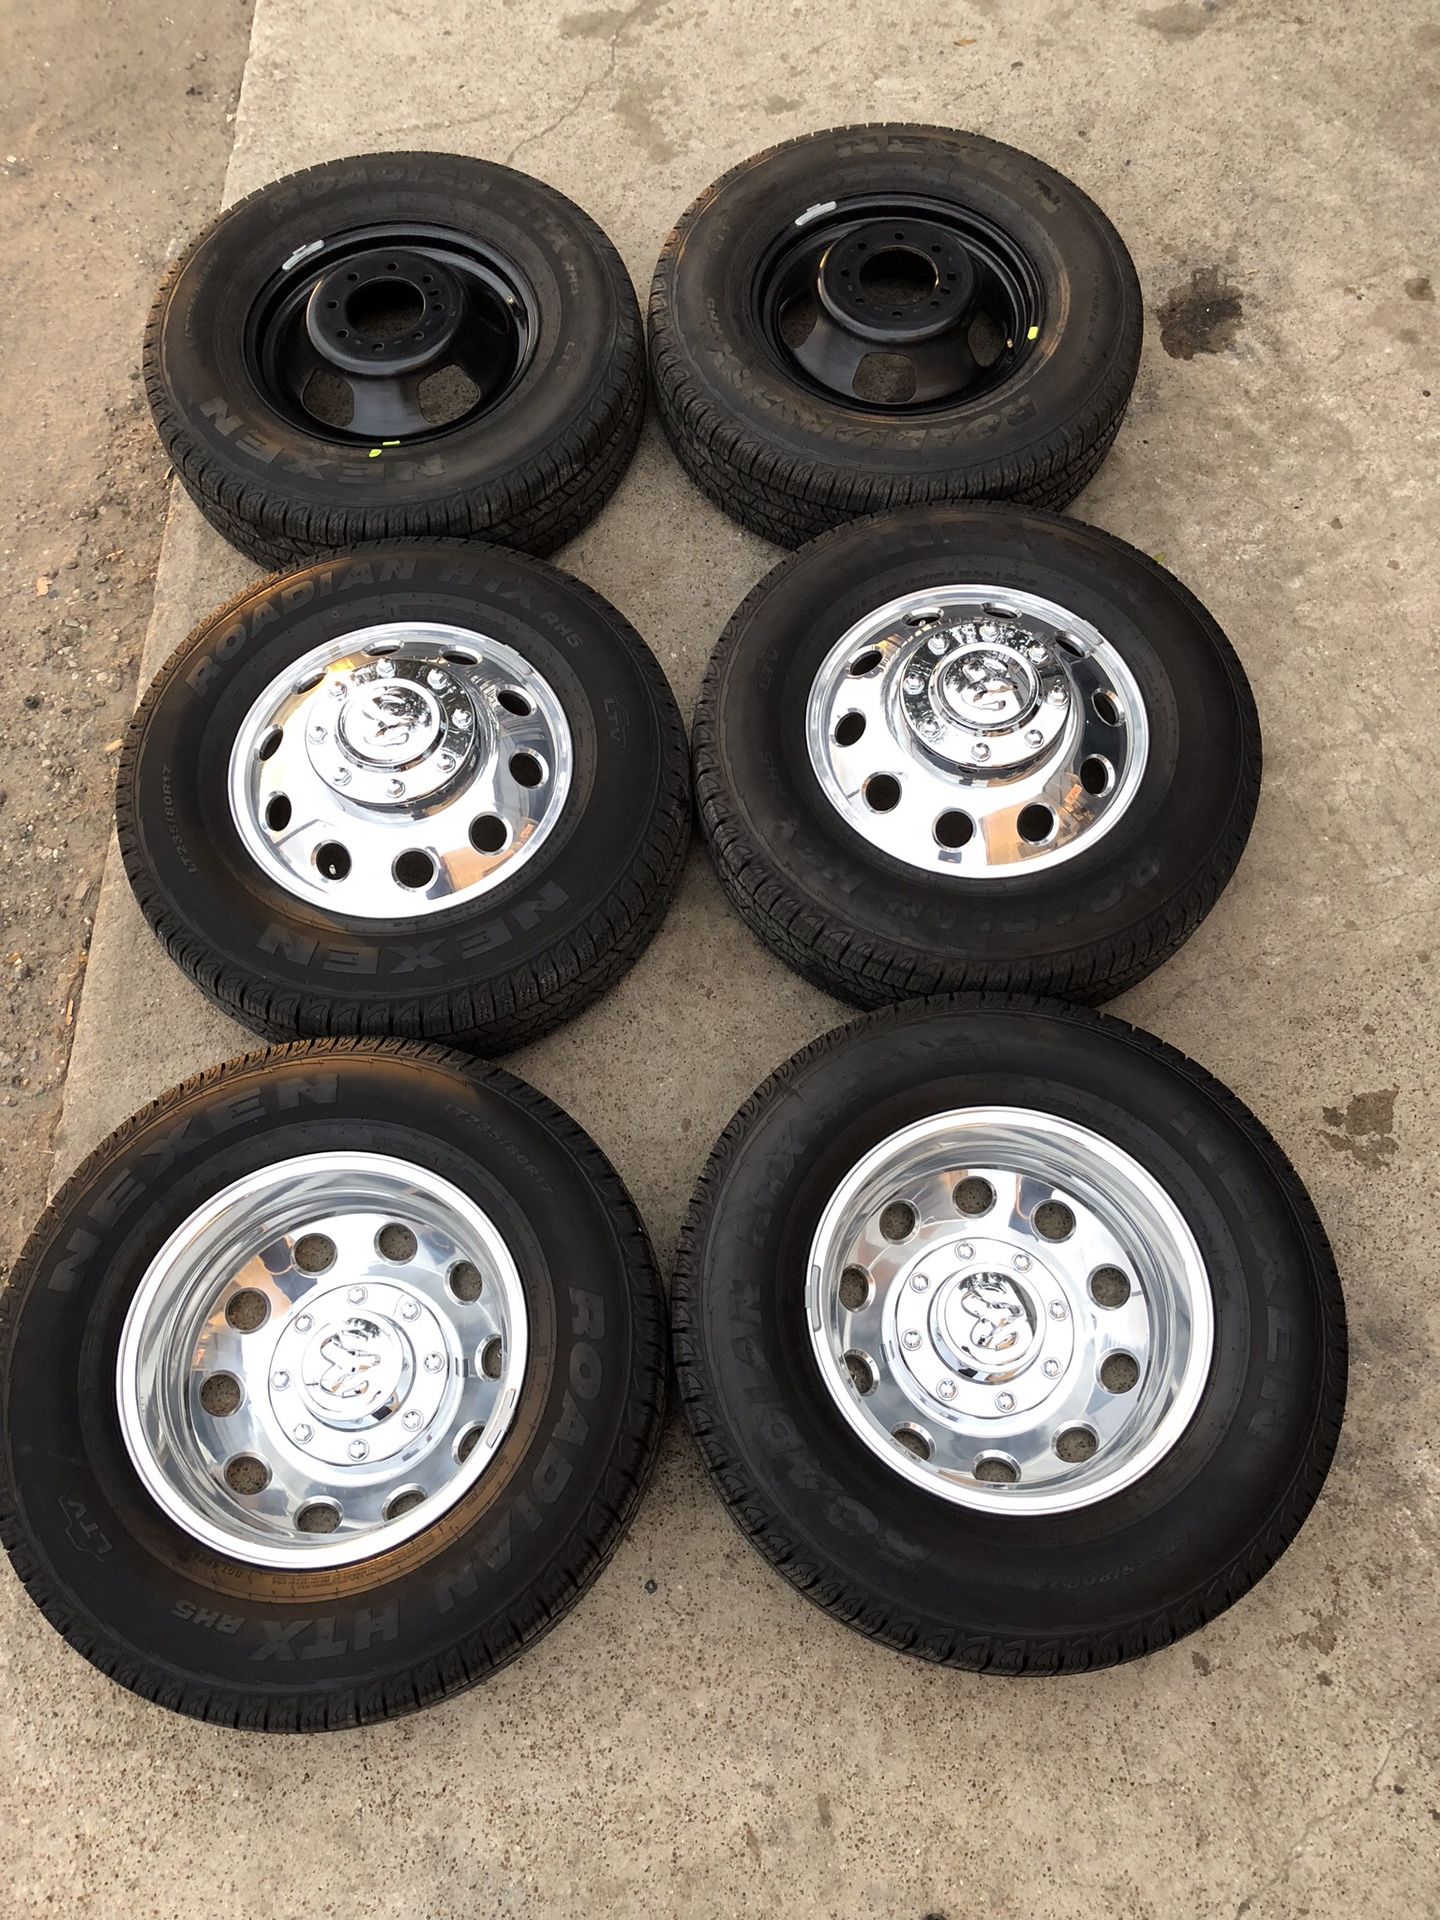 Like new Dodge Ram Dually Rims And Tires 3500 Wheels Dualli Dualy Rines y Llantas Oem factory’s factory original Take offs off takeoffs pull pulloffs